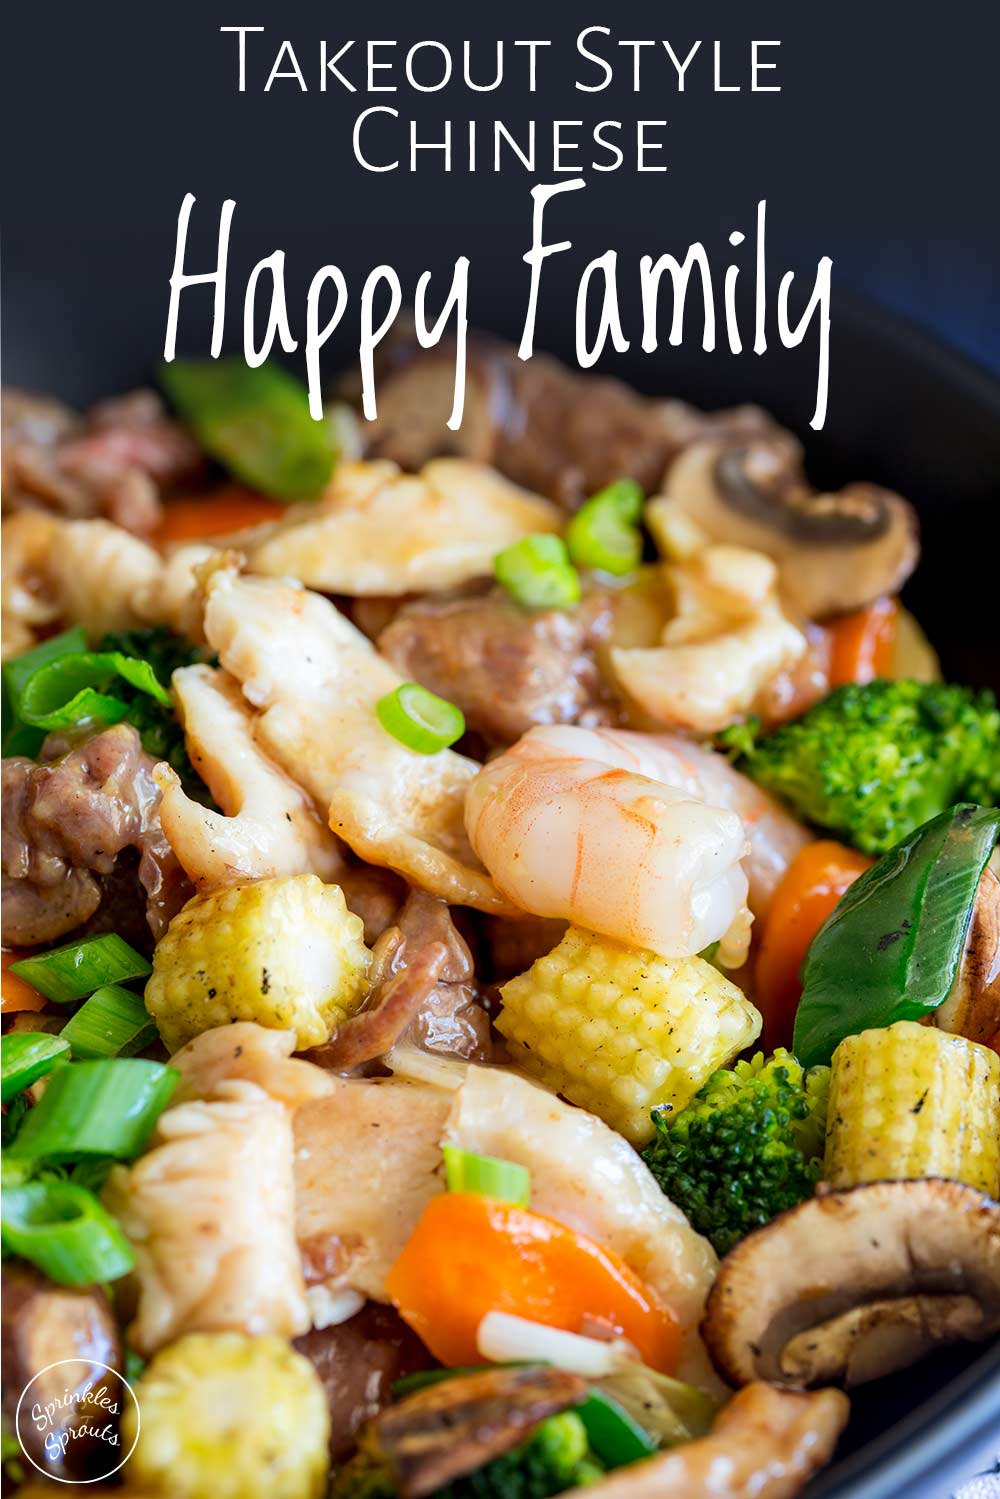 Pinterest image - close up on the chicken, beef, shrimp and vegetable in a black wok with text at the top